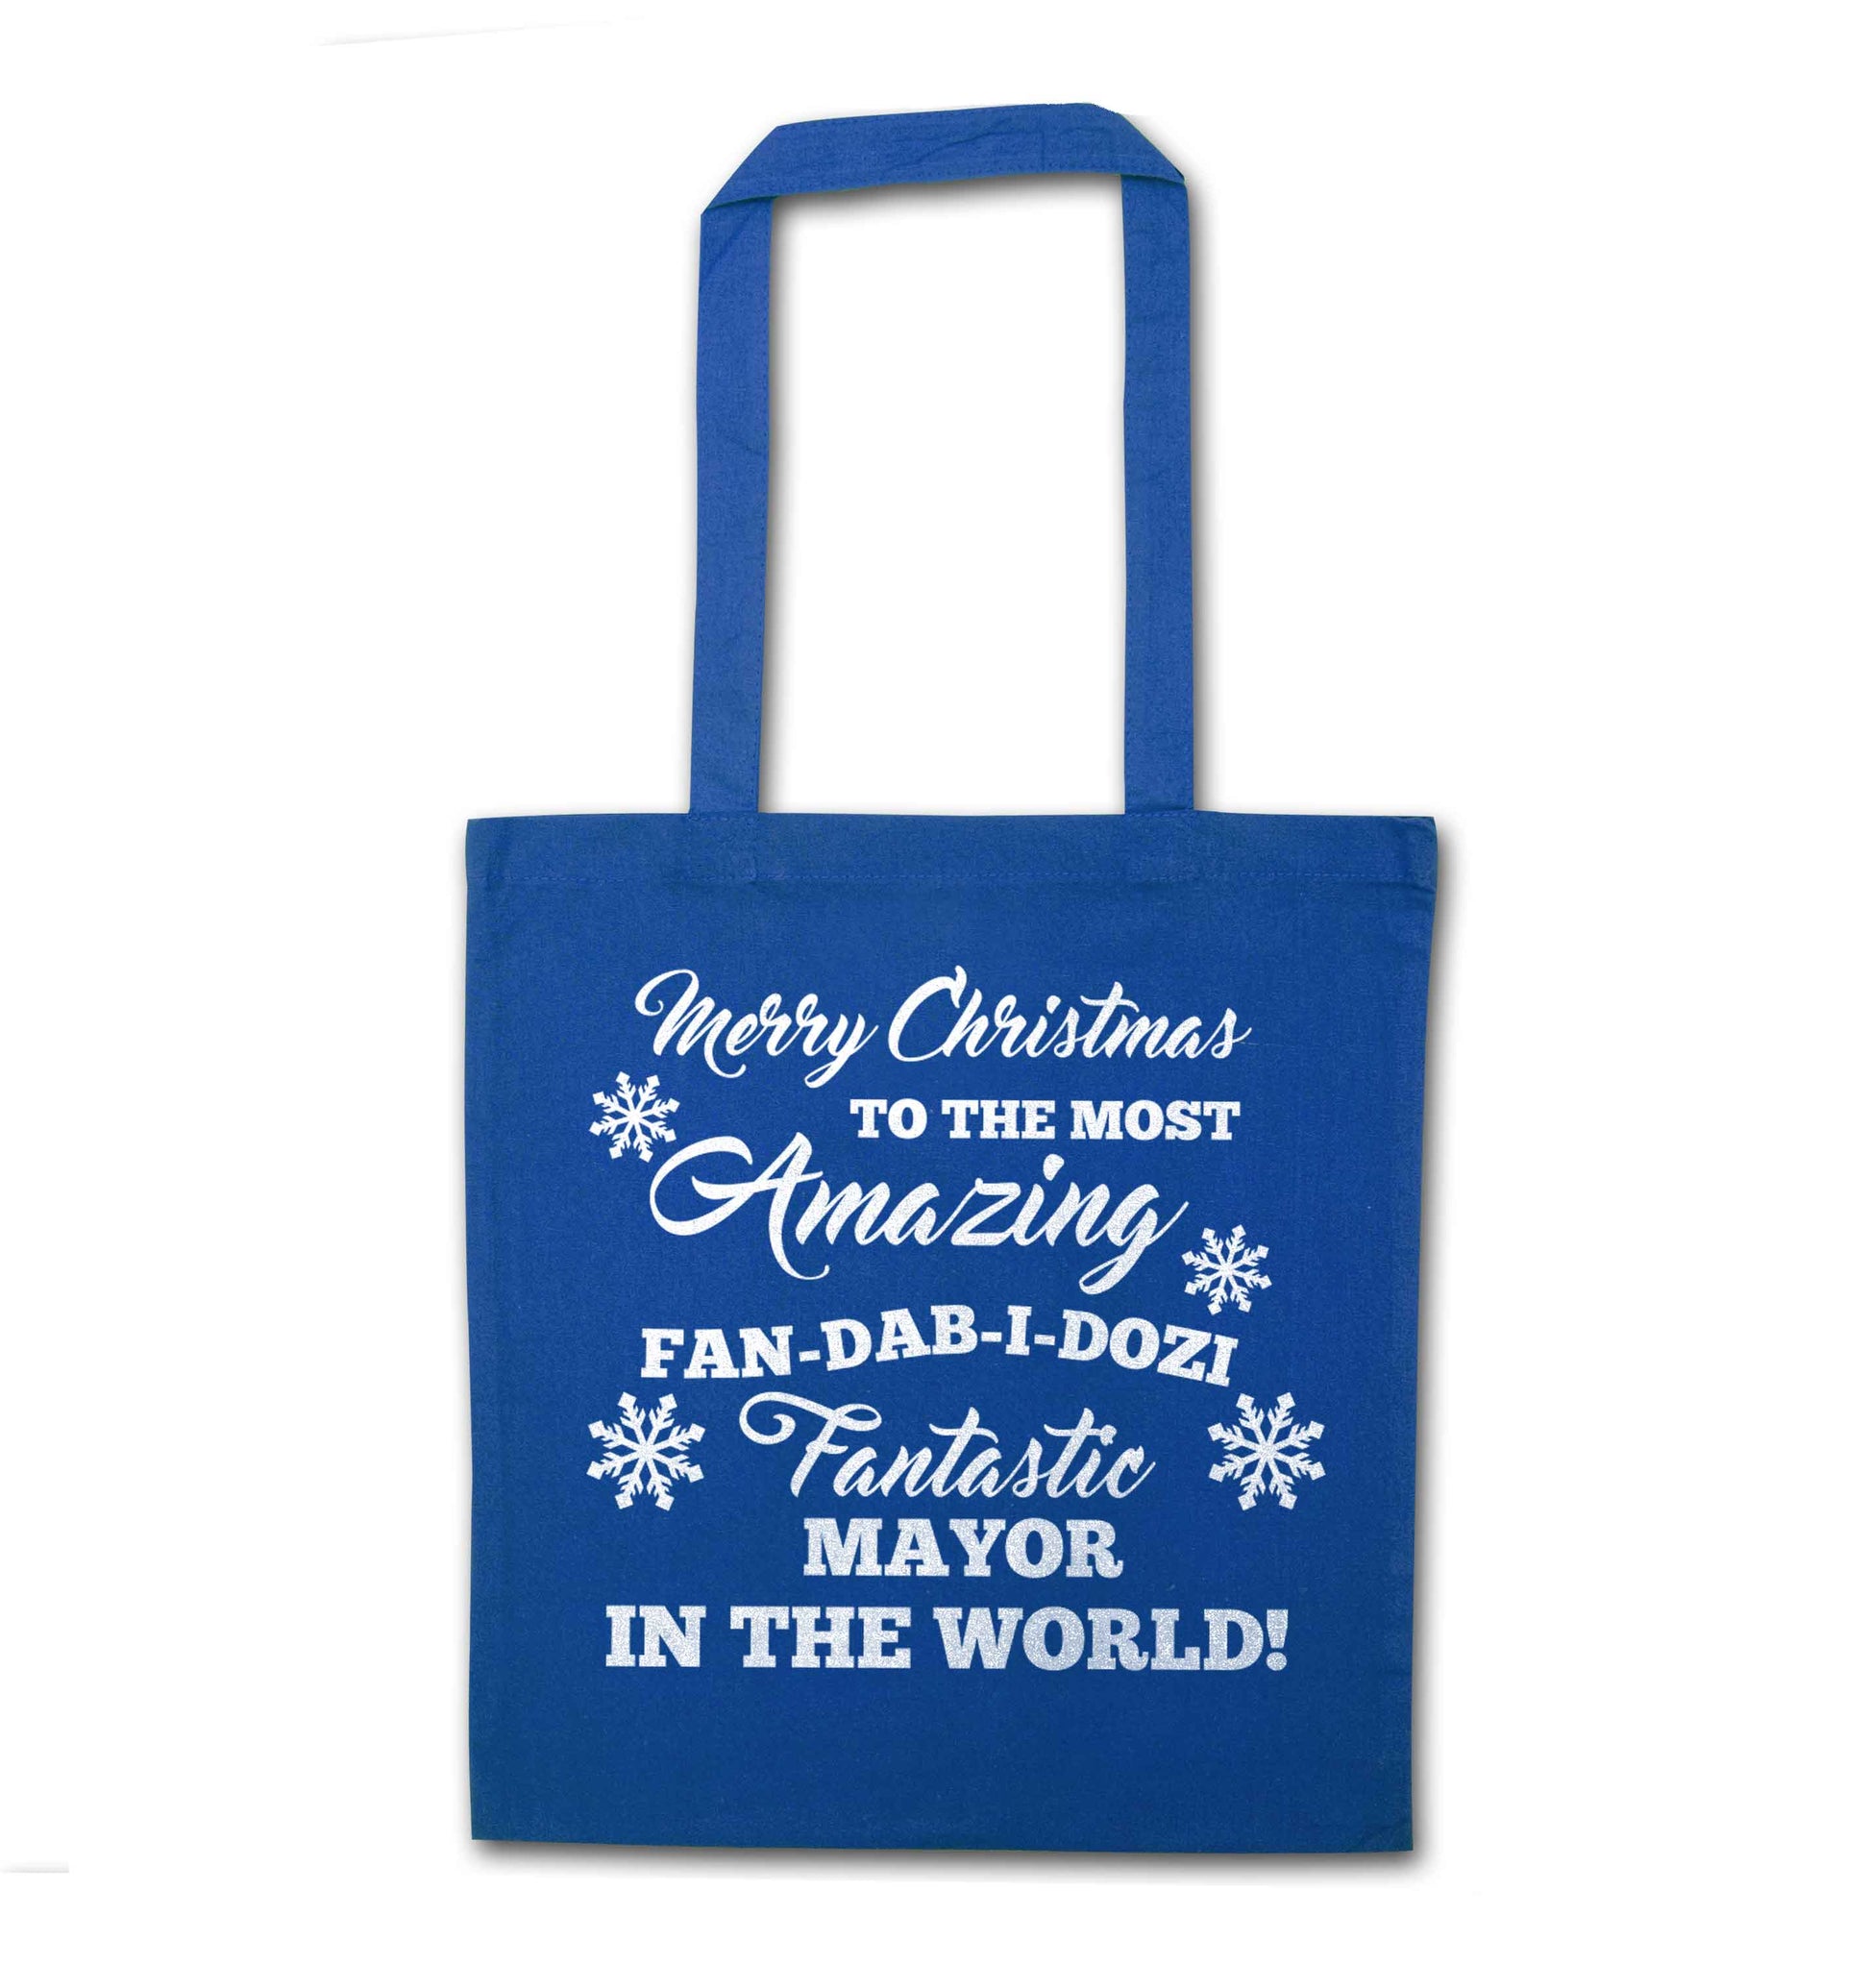 Merry Christmas to the most amazing fireman in the world! blue tote bag